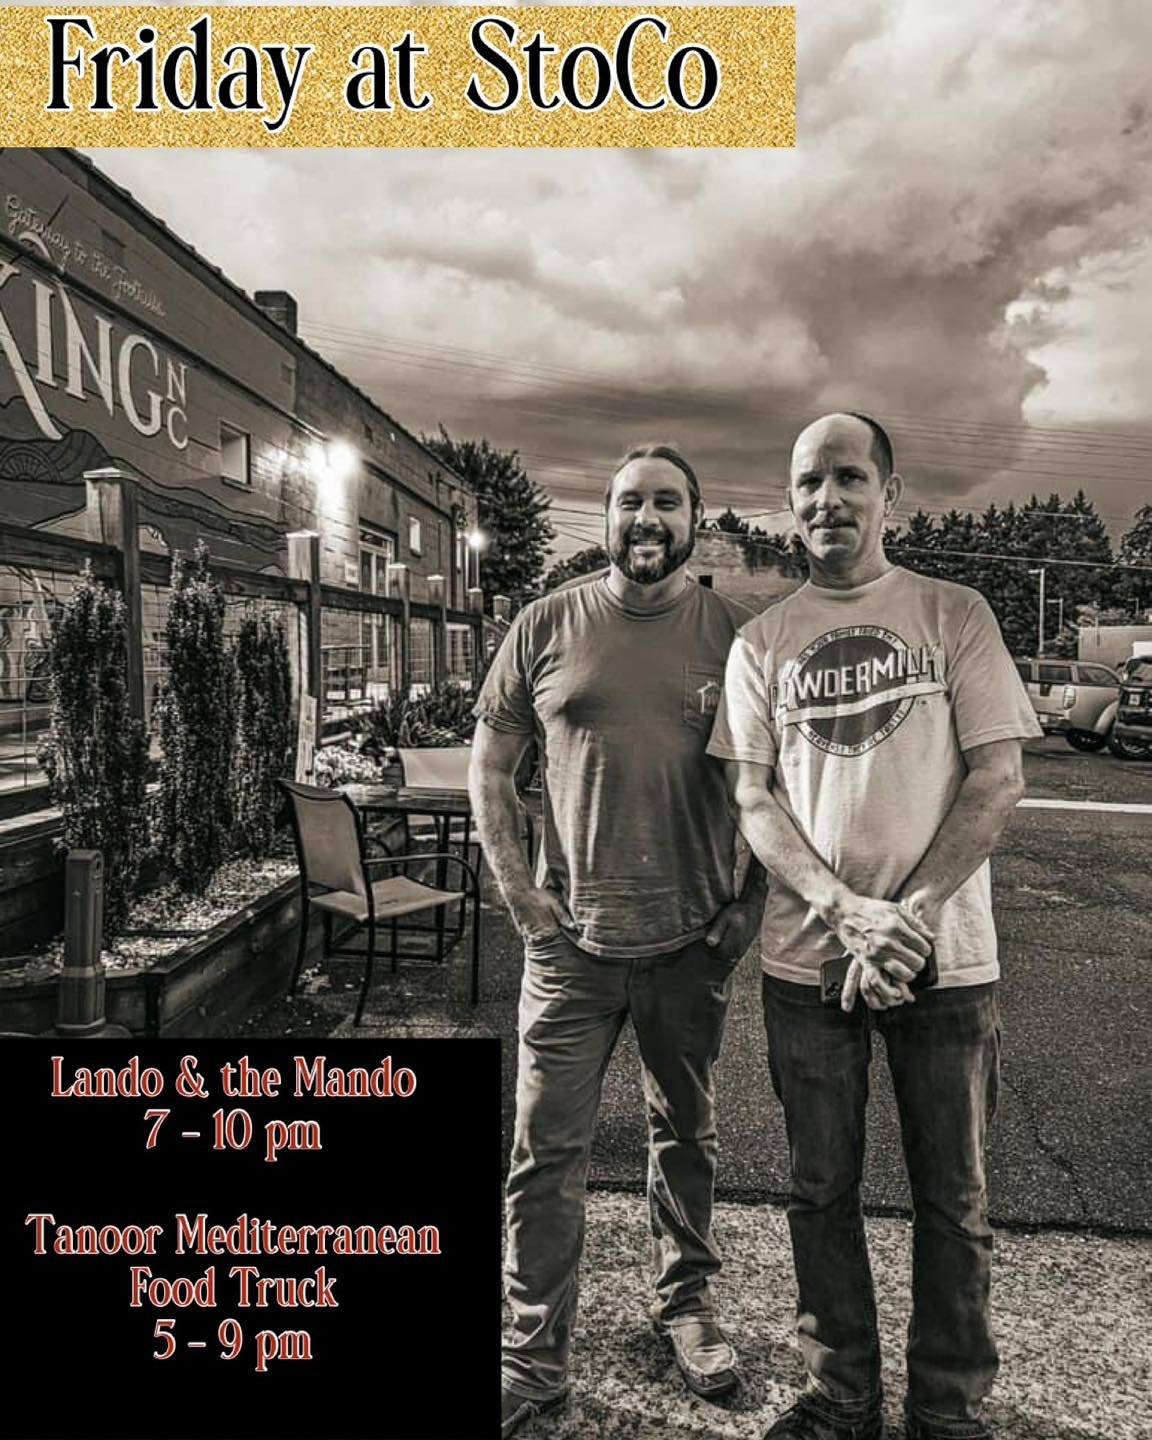 Friday!! Hopefully we will dry out today! 🌧️
⛳️The Master&rsquo;s will be on all day. 

🎸Tonight! Join us for local faves Lando and the Mando jamming from 7-10 pm and dinner with &ldquo;new to us food truck&rdquo; Tanoor Mediterranean Cuisine (soun